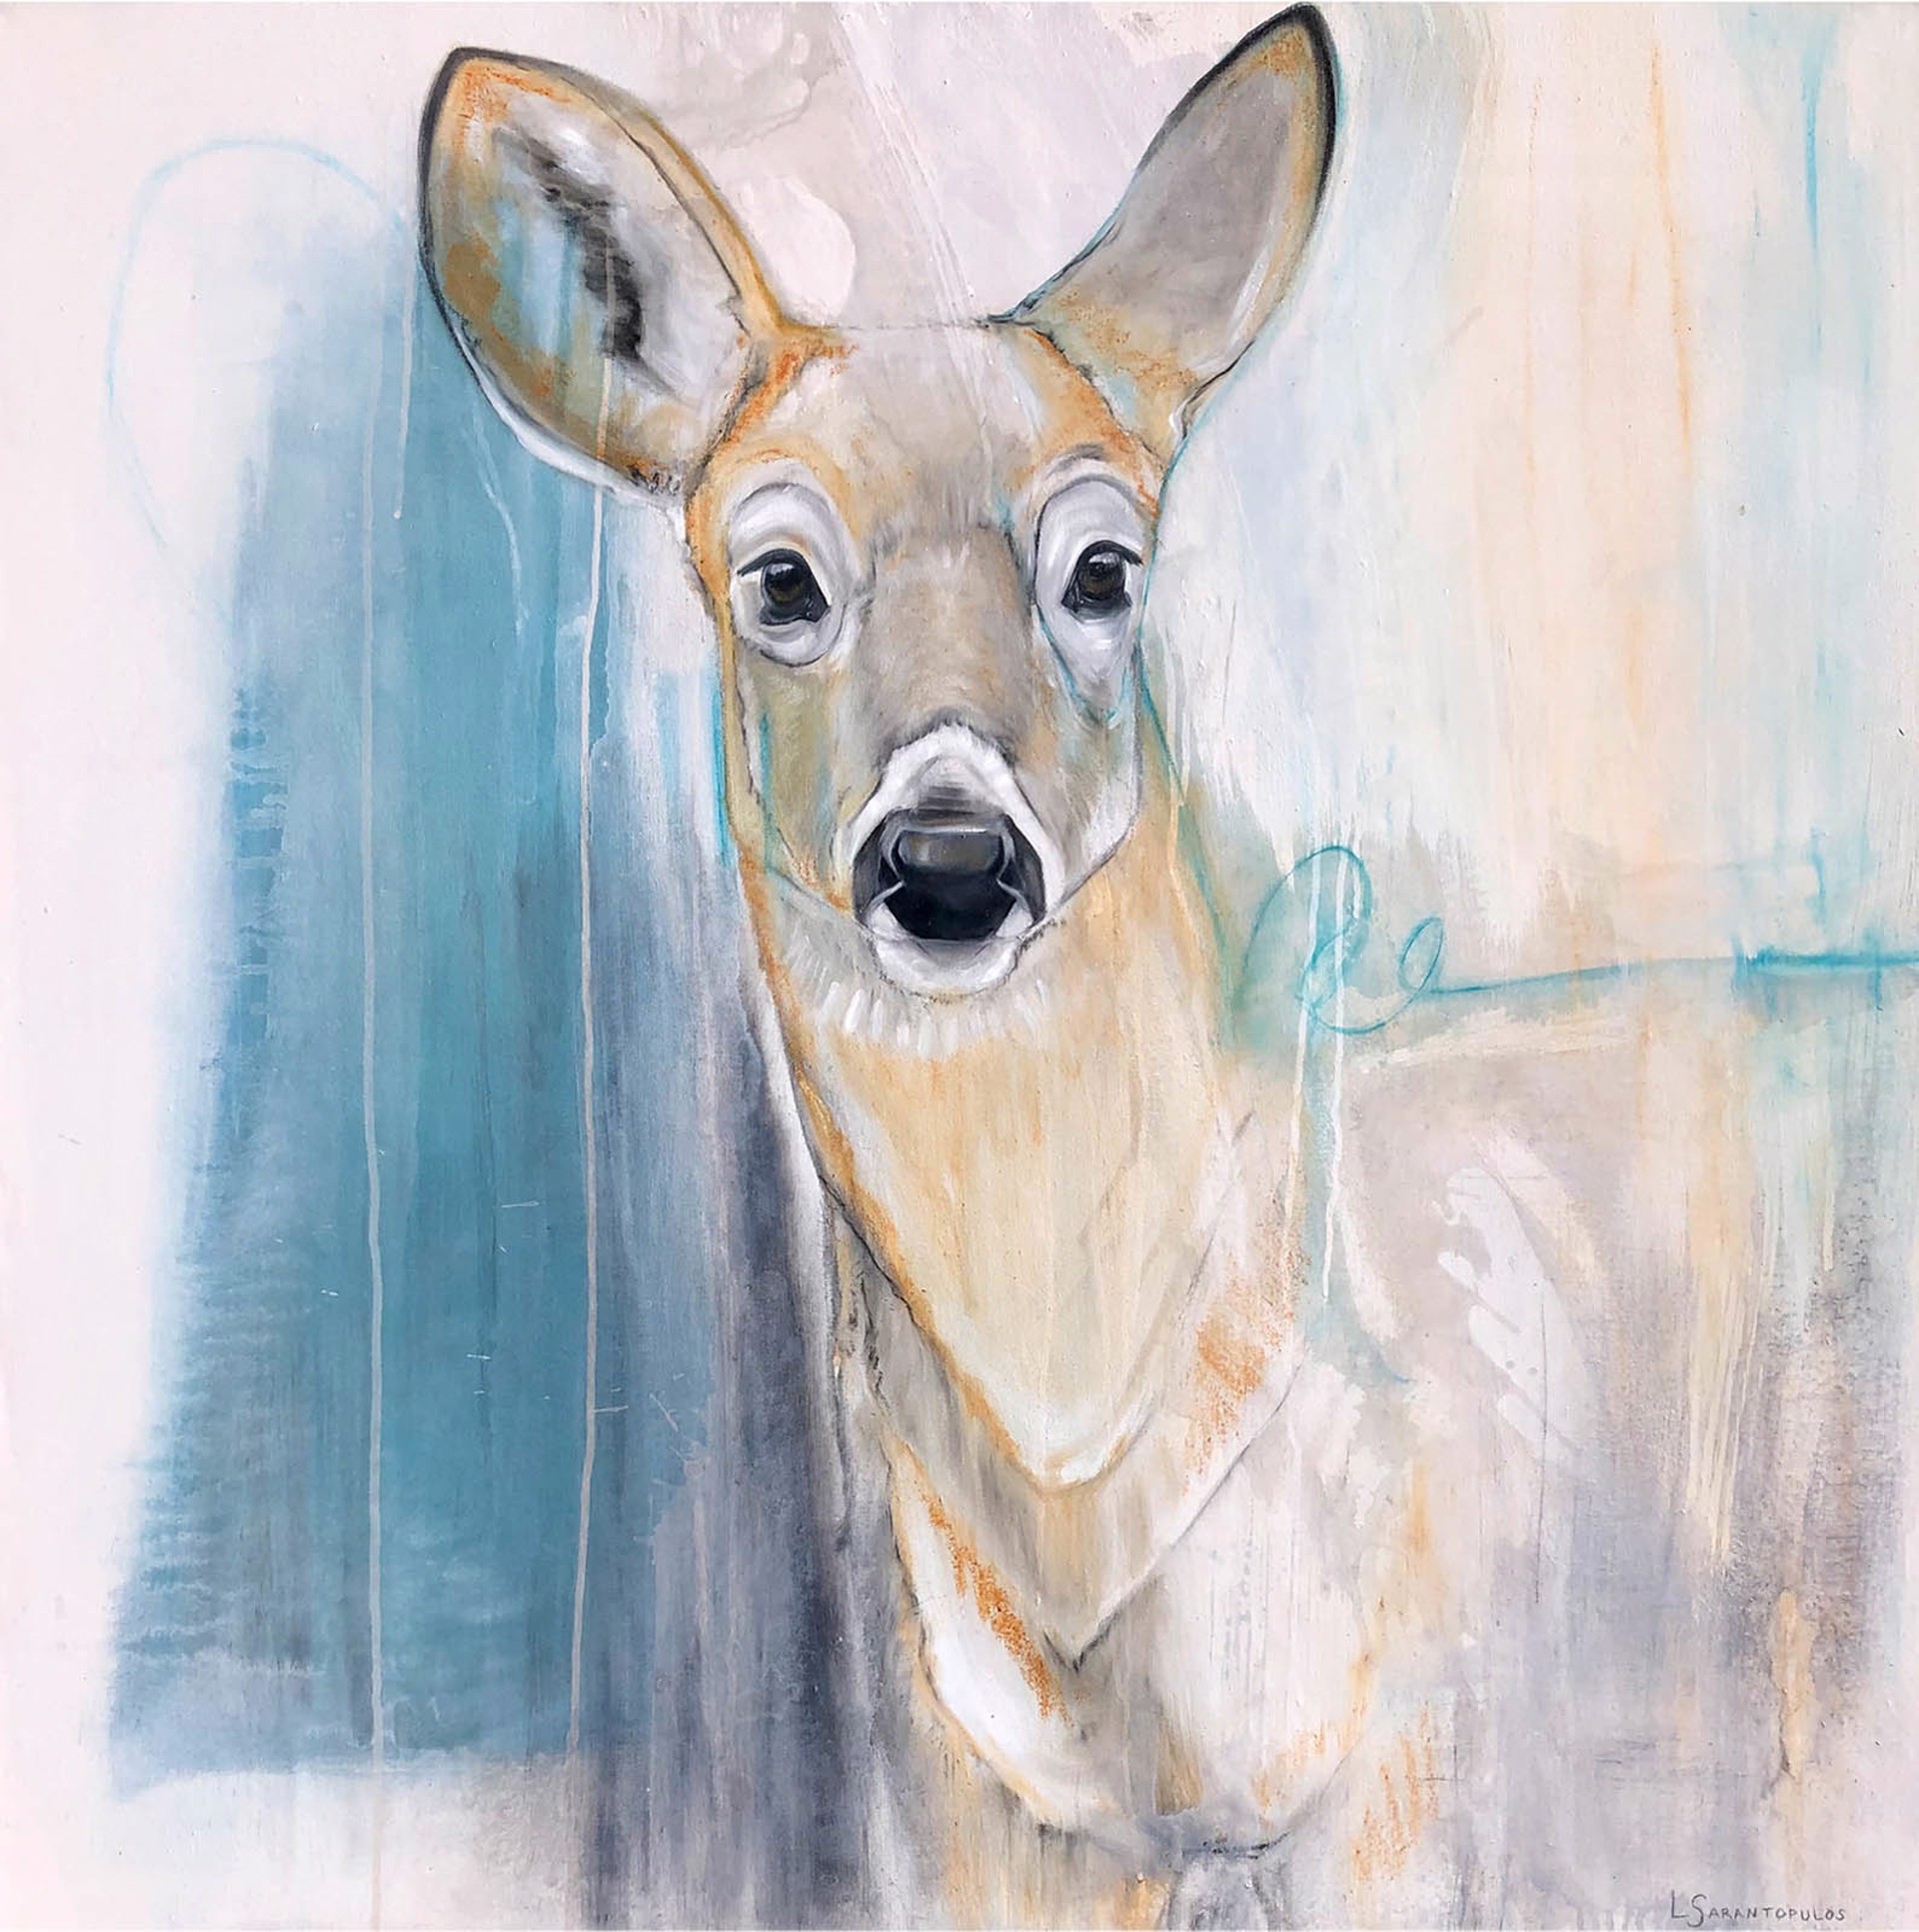 Original Mixed Media Painting Of Yellow Stone Mule Deer In Grays And Yellows With Blue Abstract Background